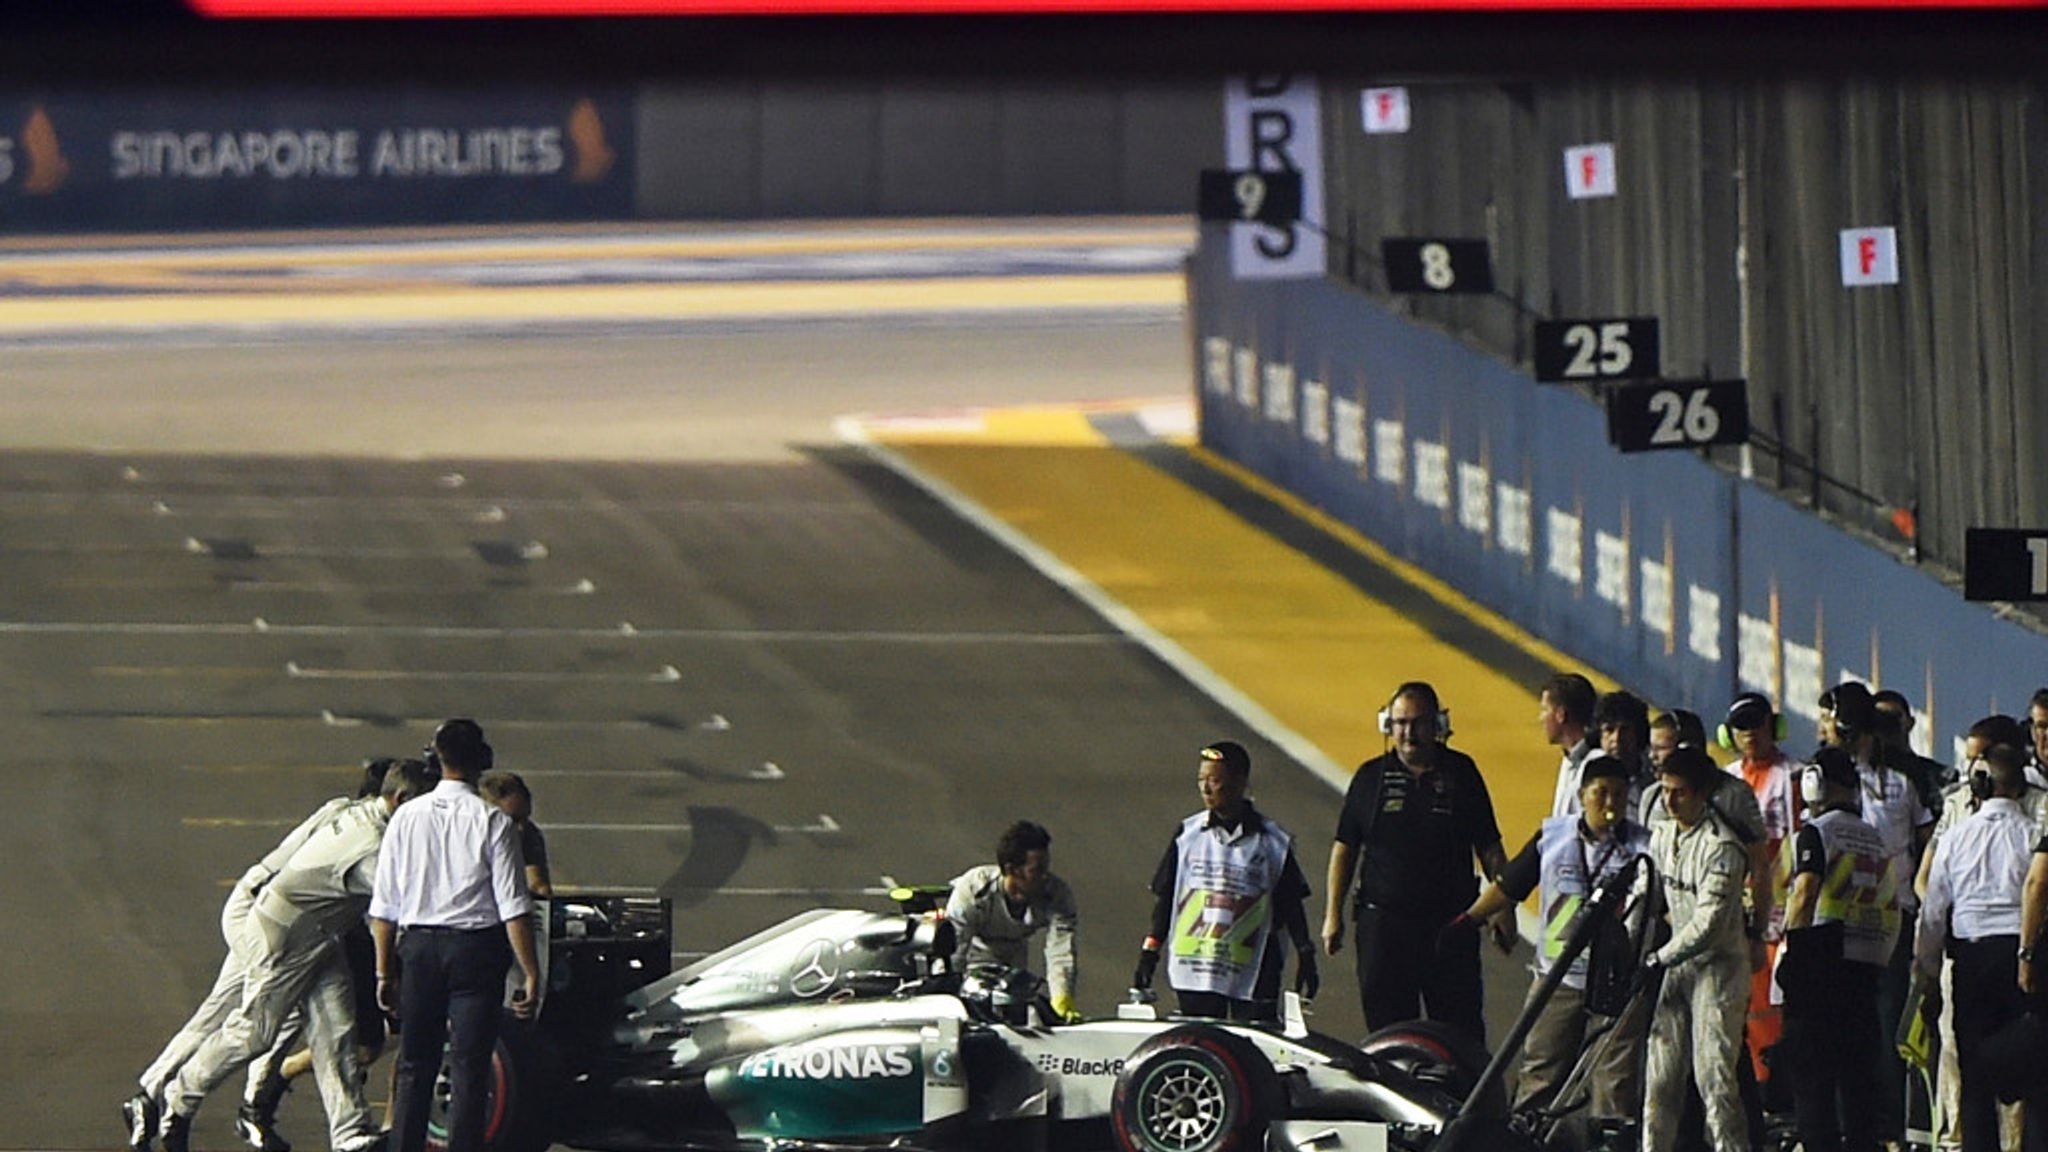 Lewis Hamilton's F1 title chase hits buffers at Singapore Grand